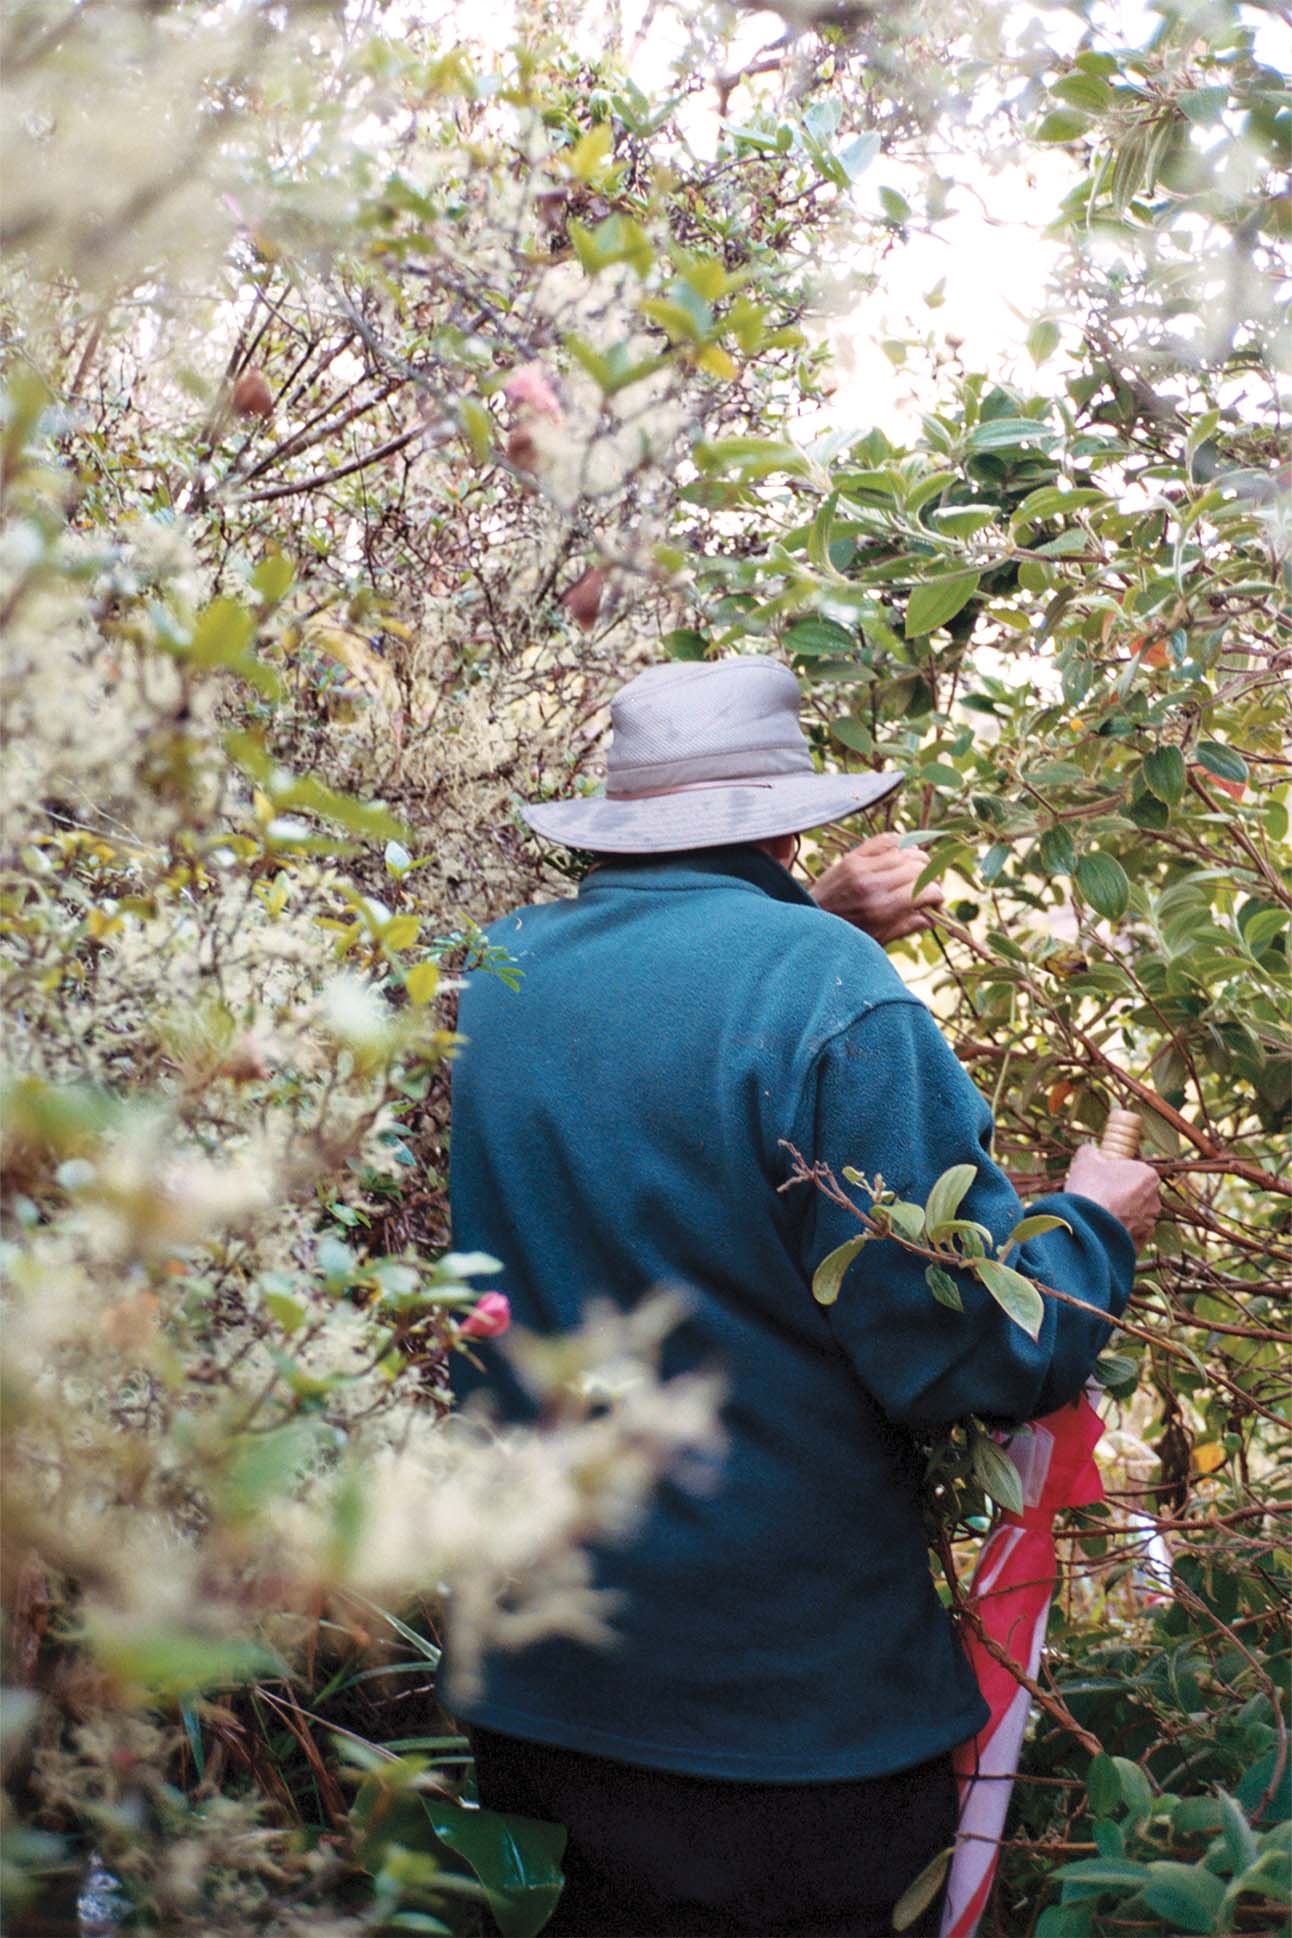 A person wearing a wide-brimmed hat and a blue sweatshirt is standing amidst dense shrubbery, reaching into the branches with their hands.